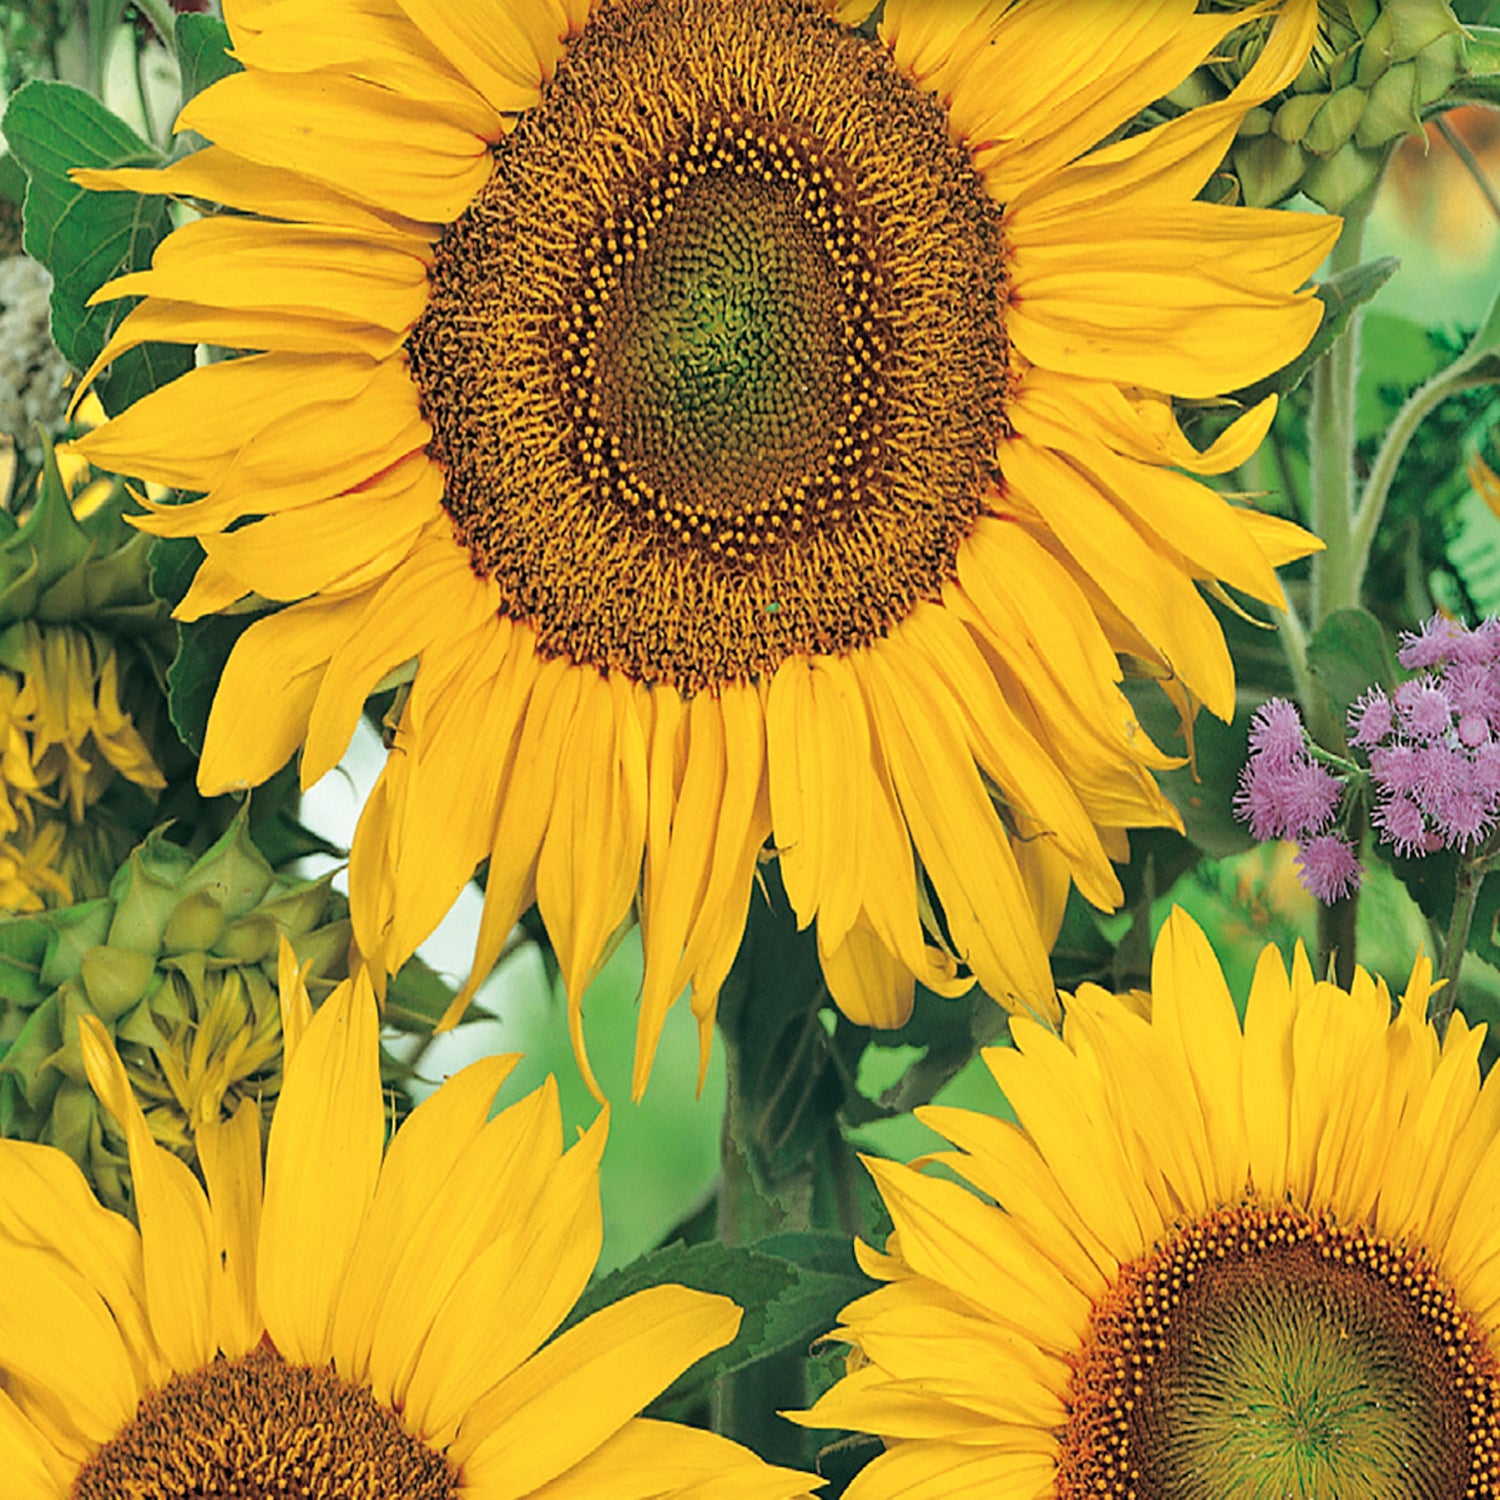 Sunflower, Autumn Beauty Mixed Colors Annual Flower Seeds – Ferry